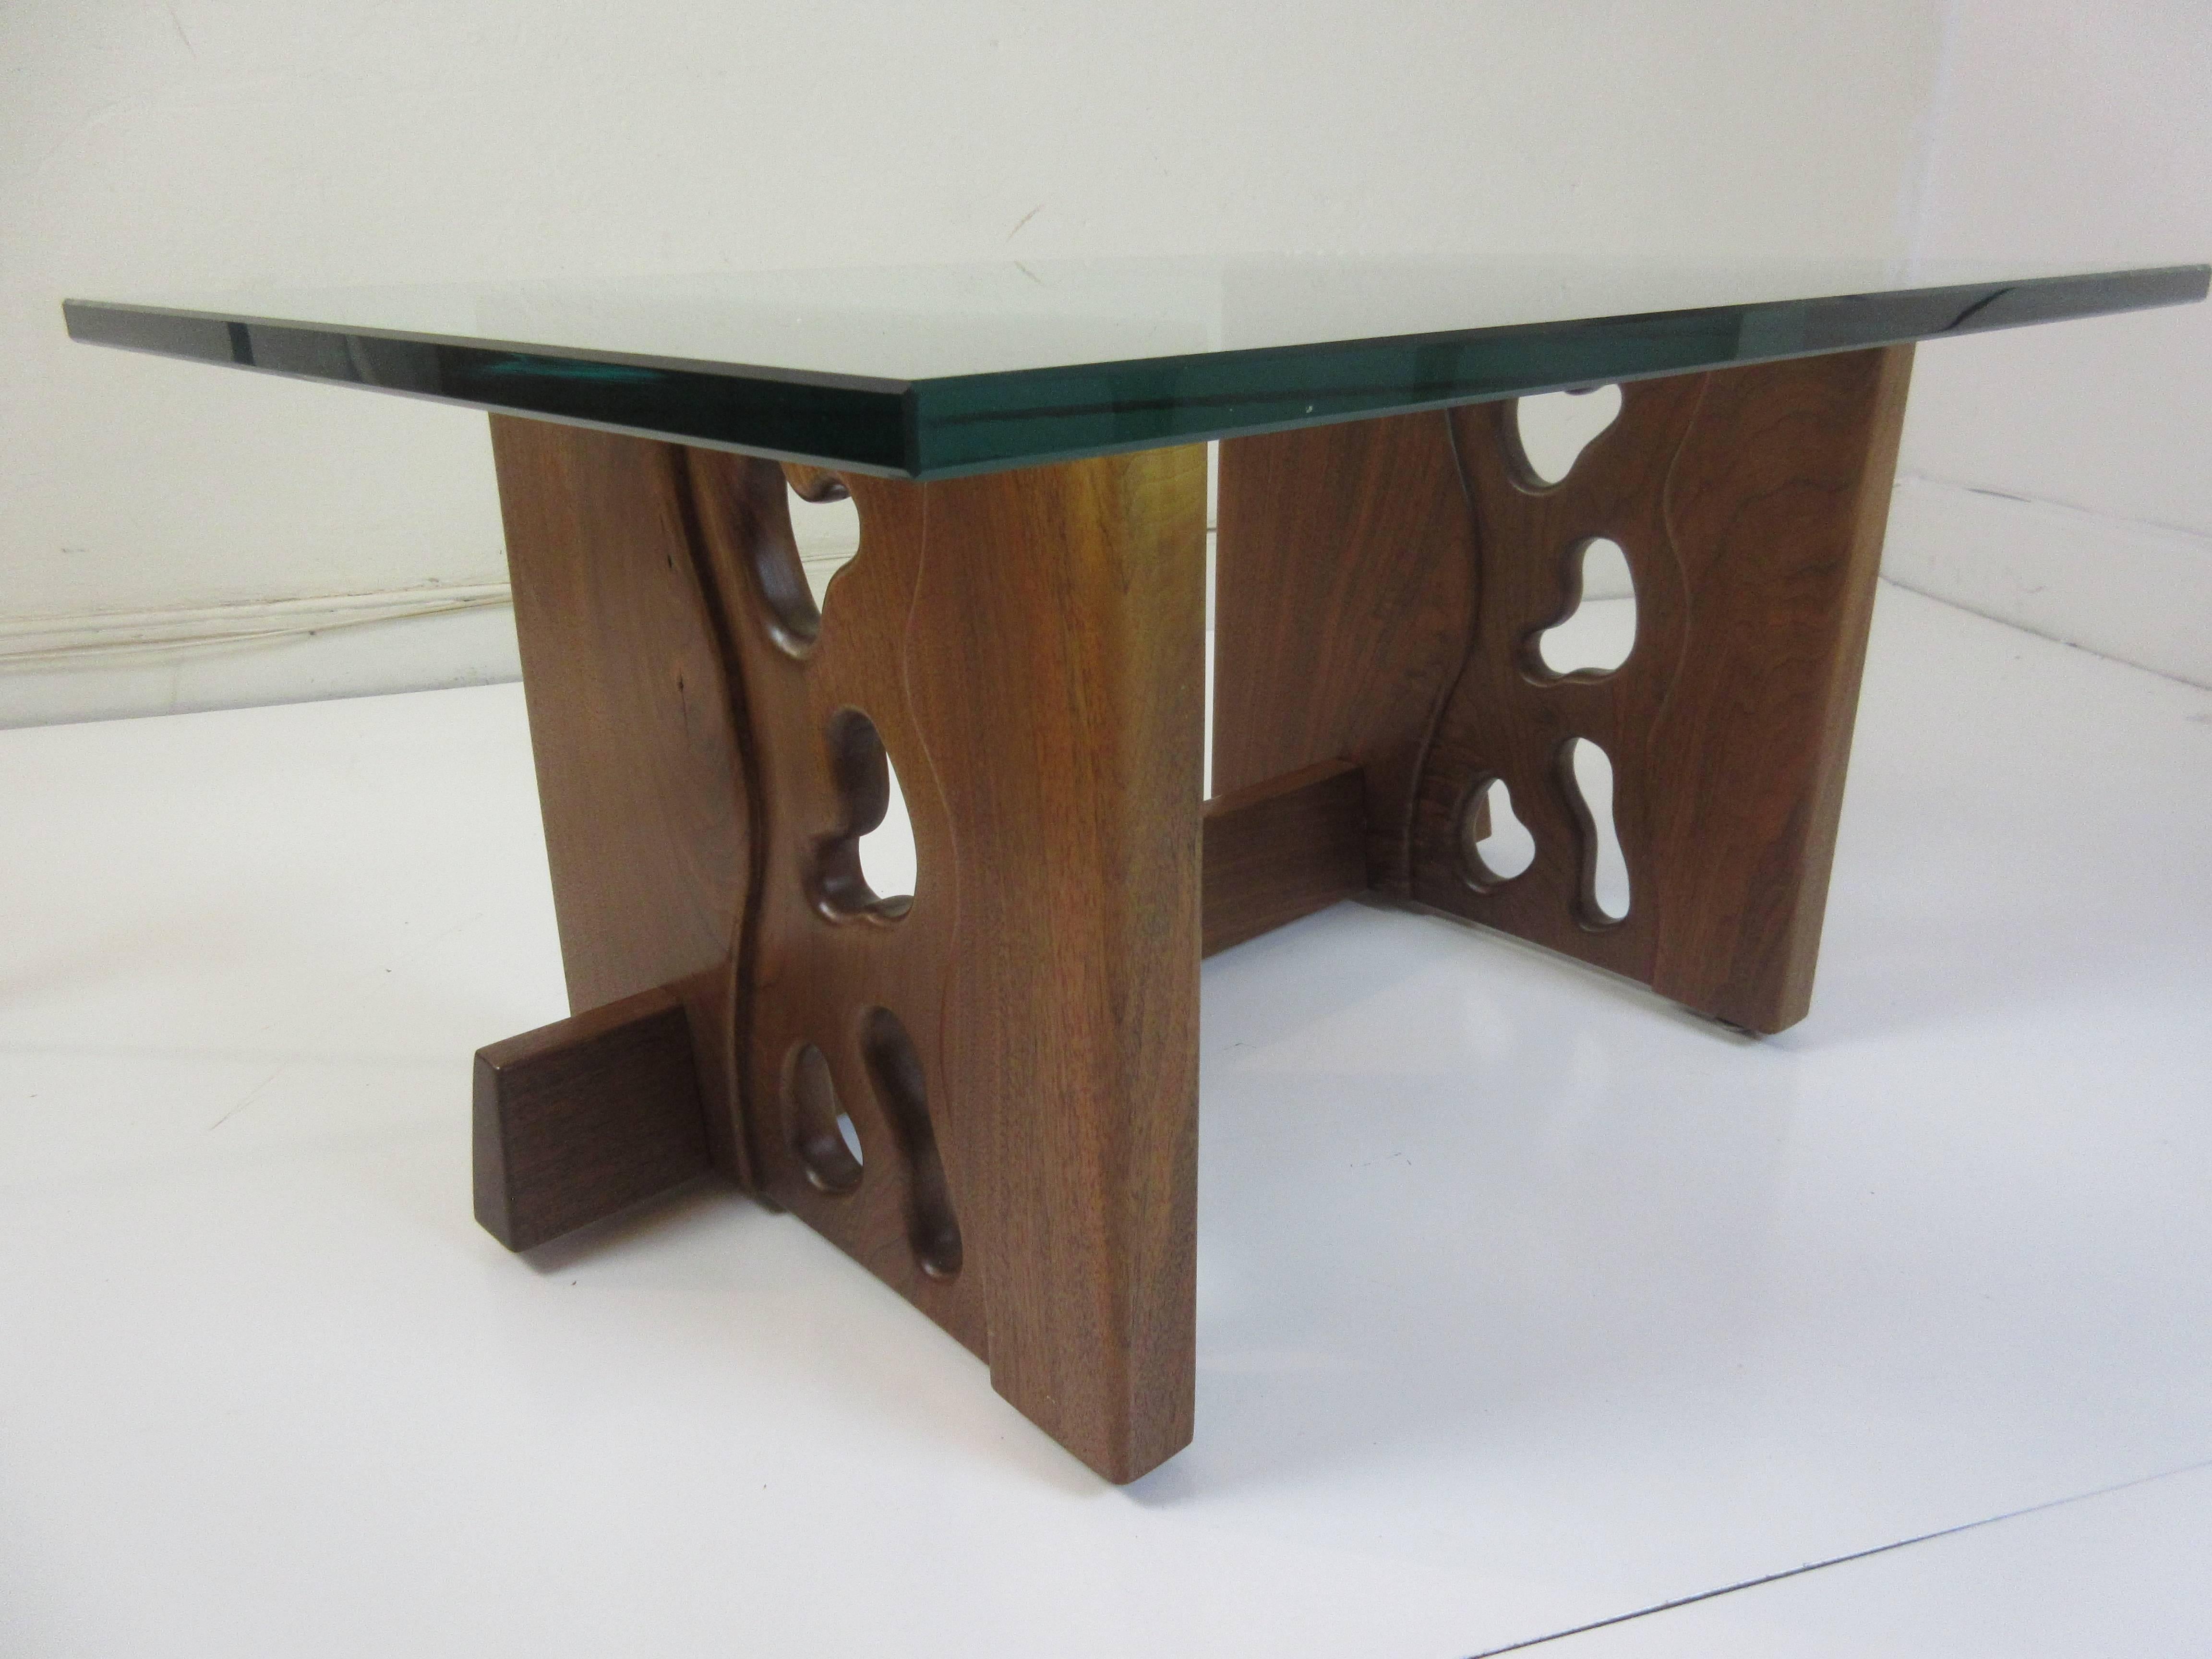 New Hope School walnut coffee table from 1978 by P. Wexter, signed bottom edge in pencil. Great size, with abstract carved side panels and one connecting Walnut rail.